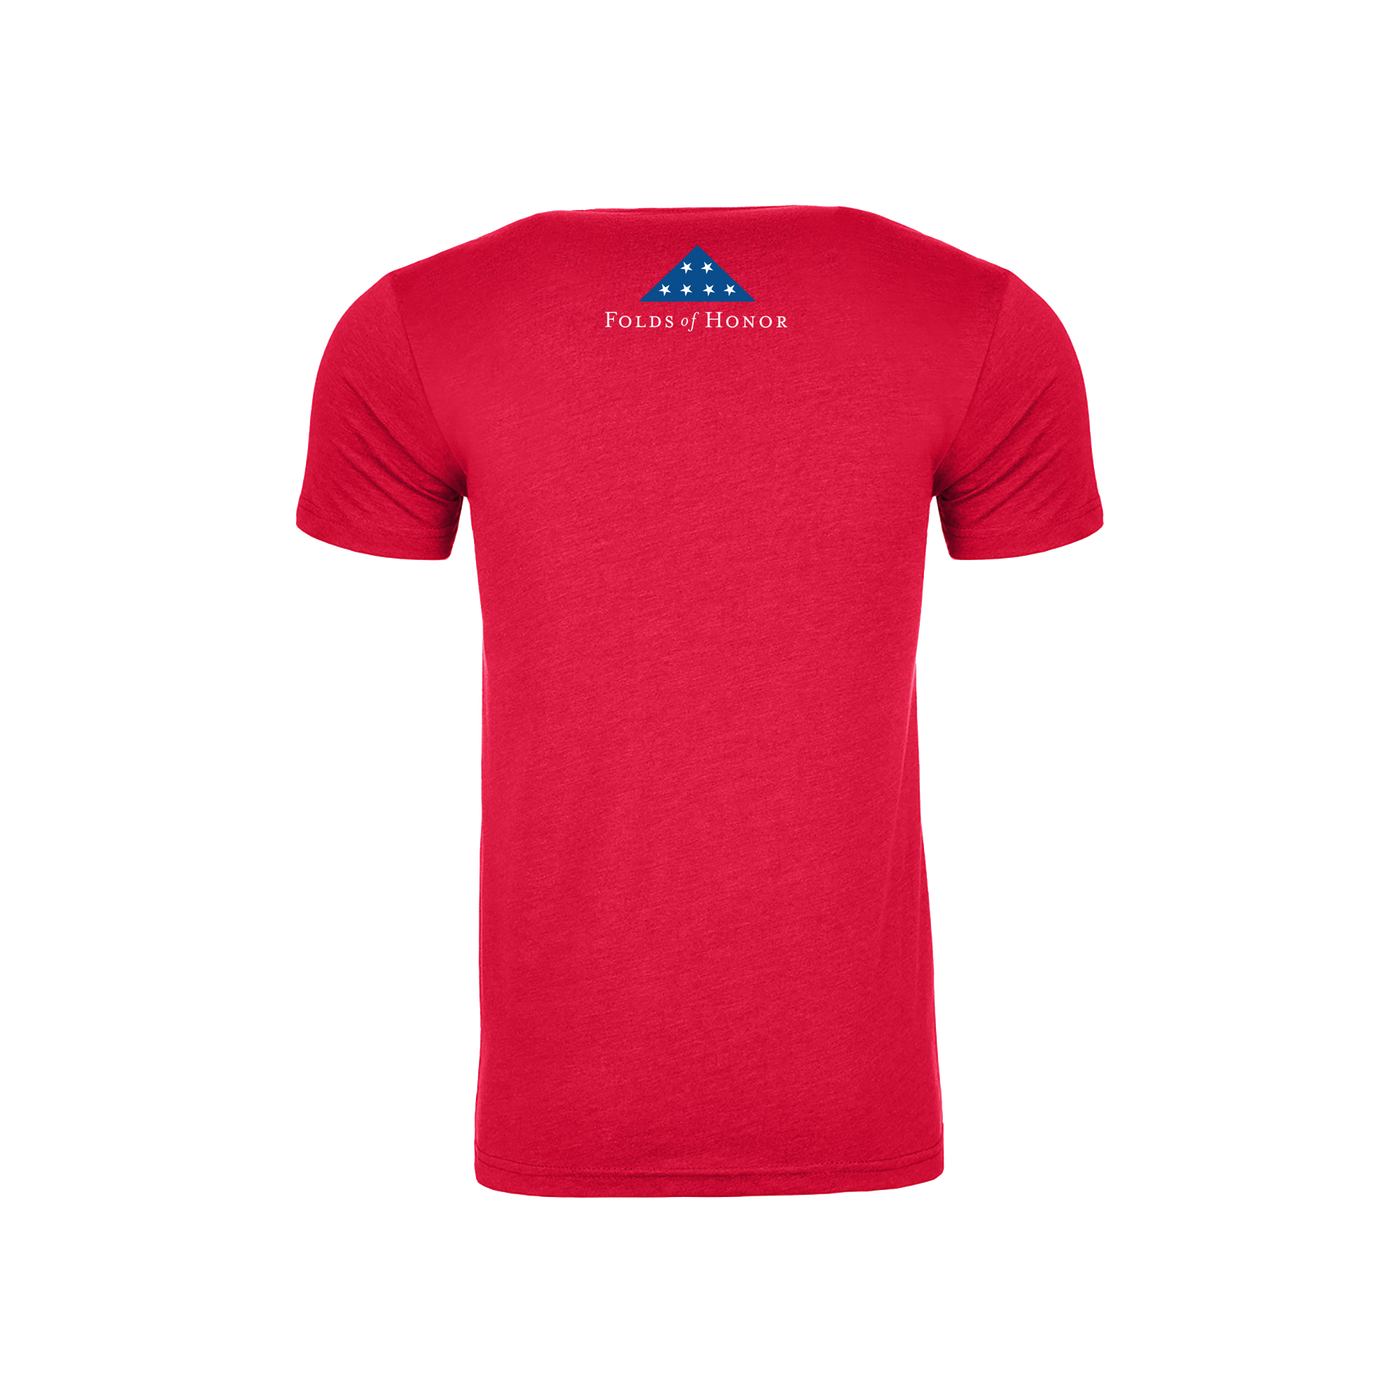 Youth Folds of Honor T-Shirt - Red